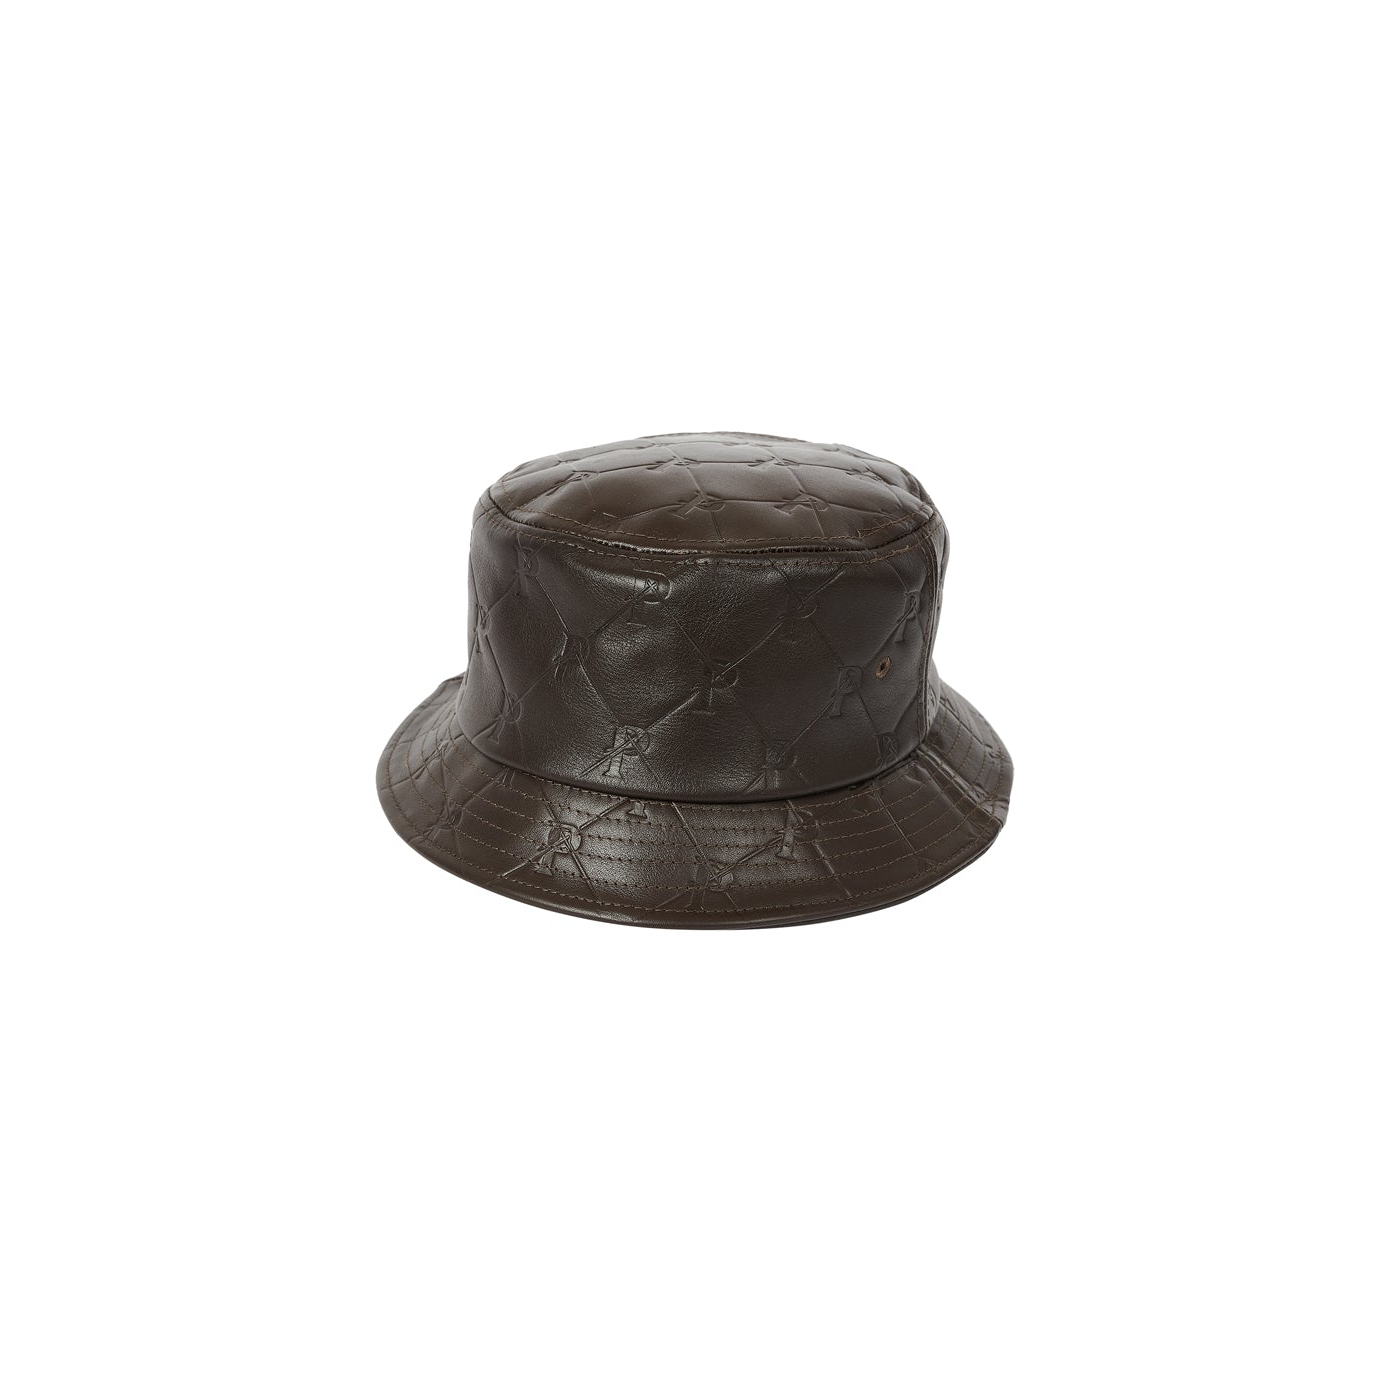 Thumbnail PAL-M-GRAM LEATHER BUCKET HAT BROWN one color